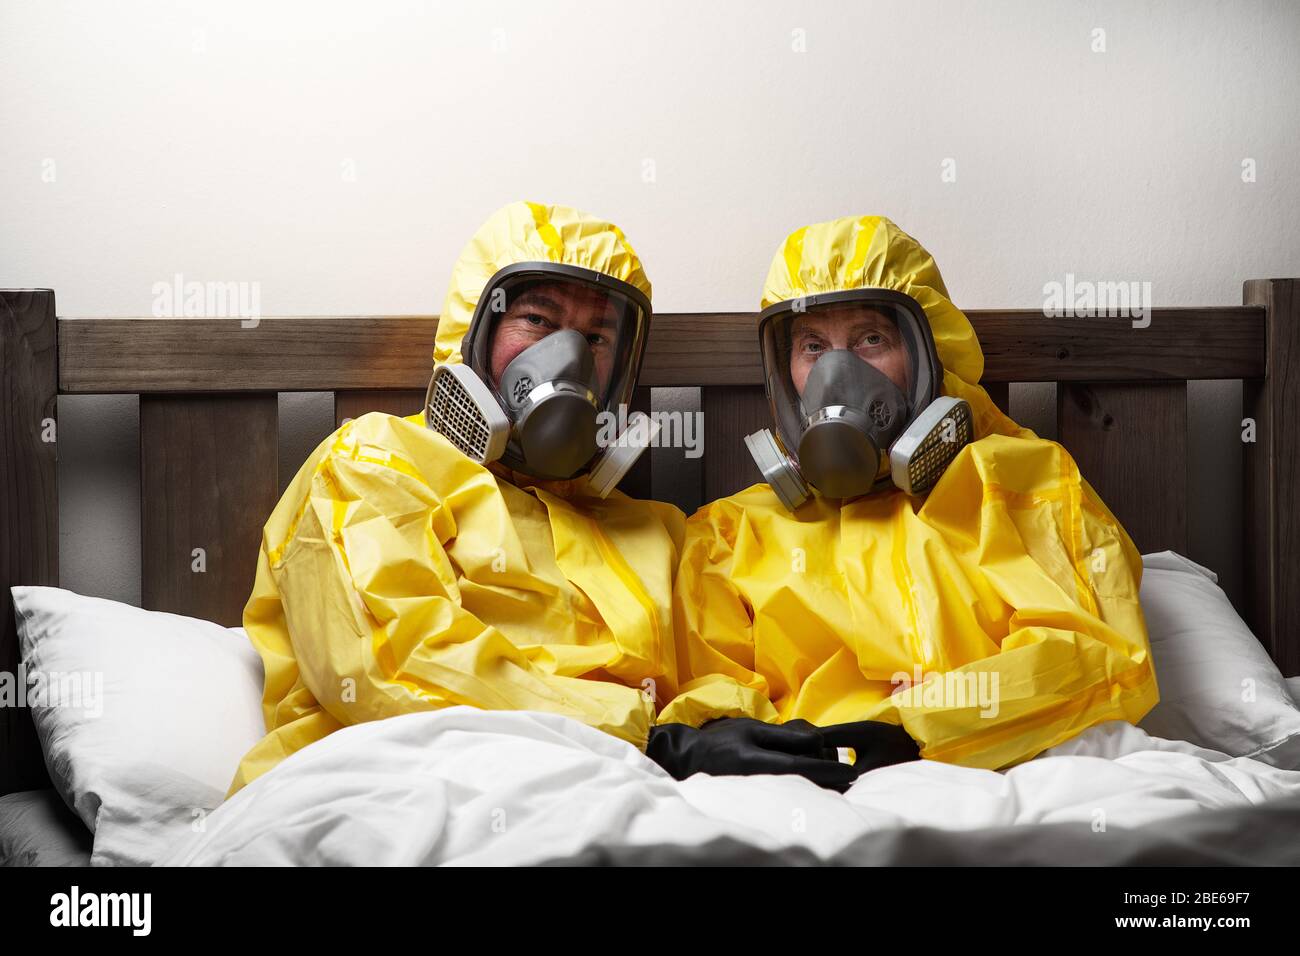 two people self isolating in bed being extra careful and wearing hazmat suit Stock Photo